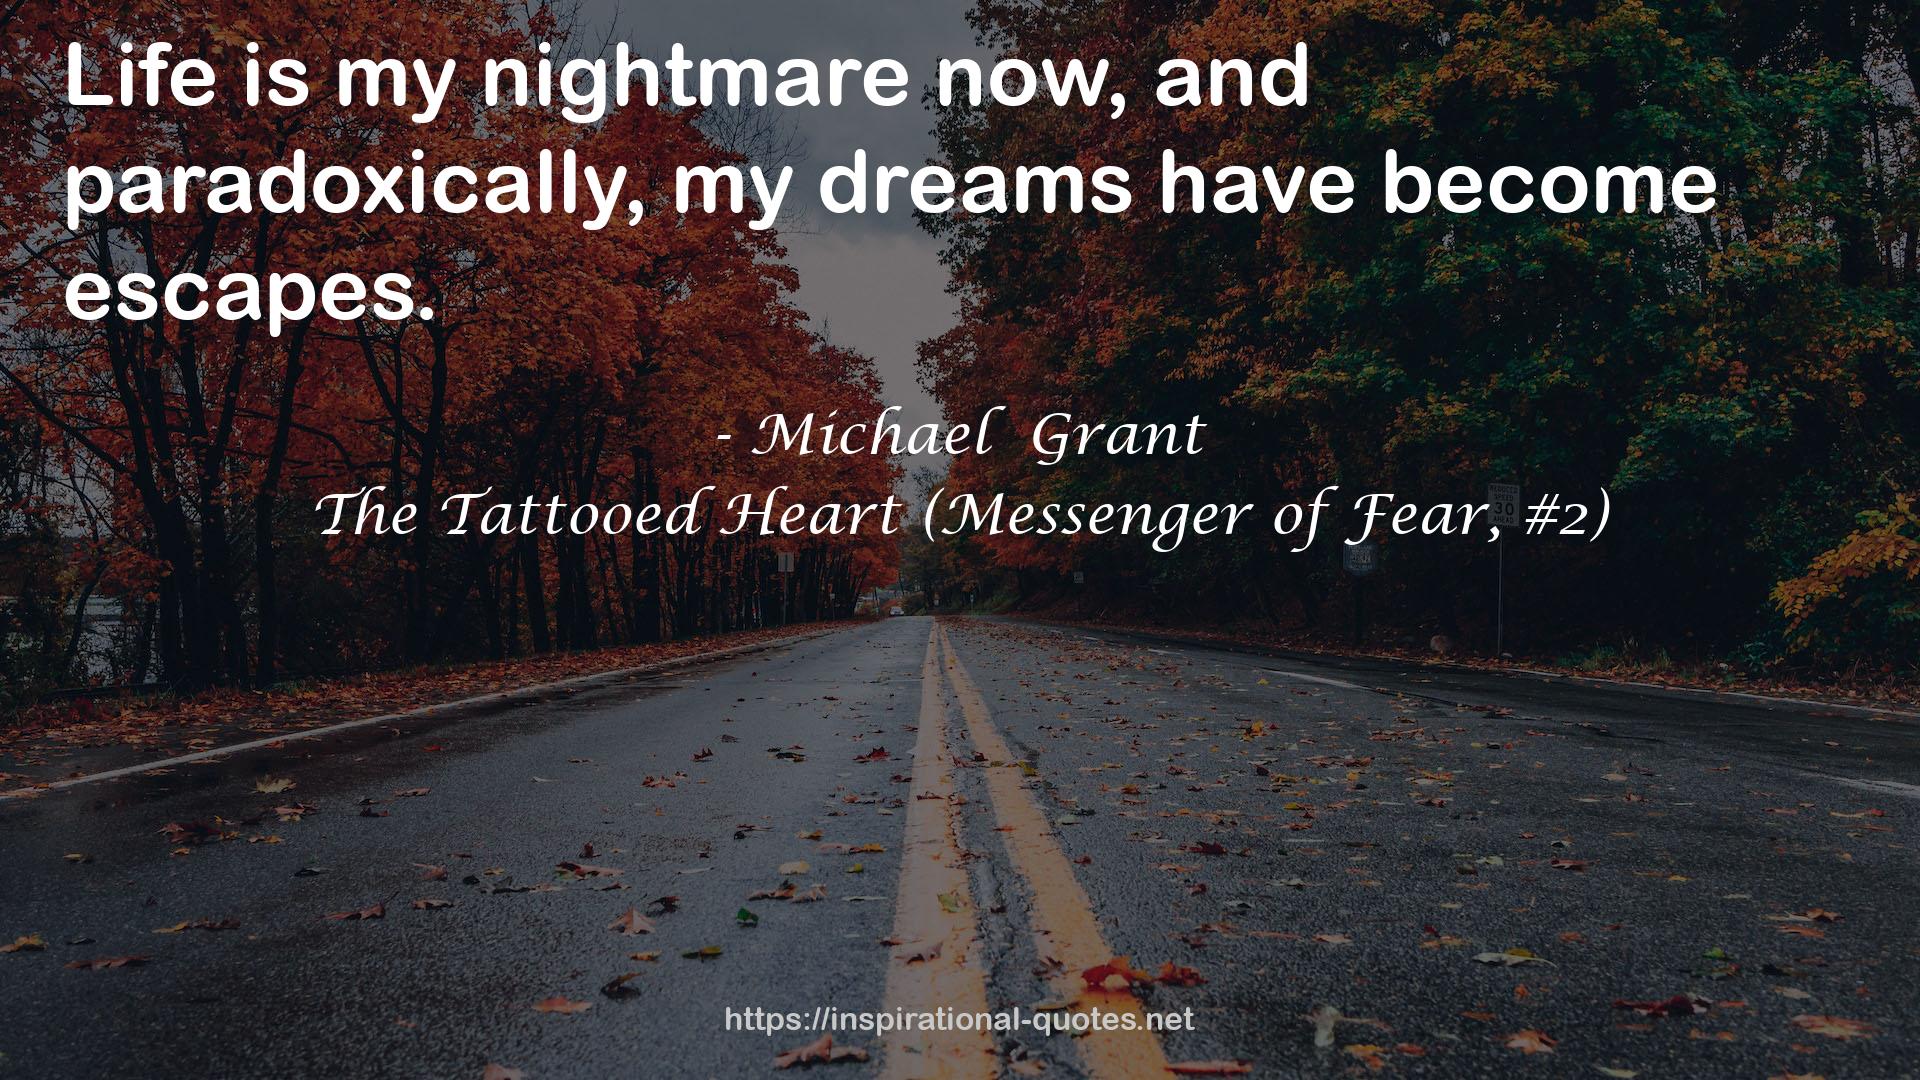 The Tattooed Heart (Messenger of Fear, #2) QUOTES